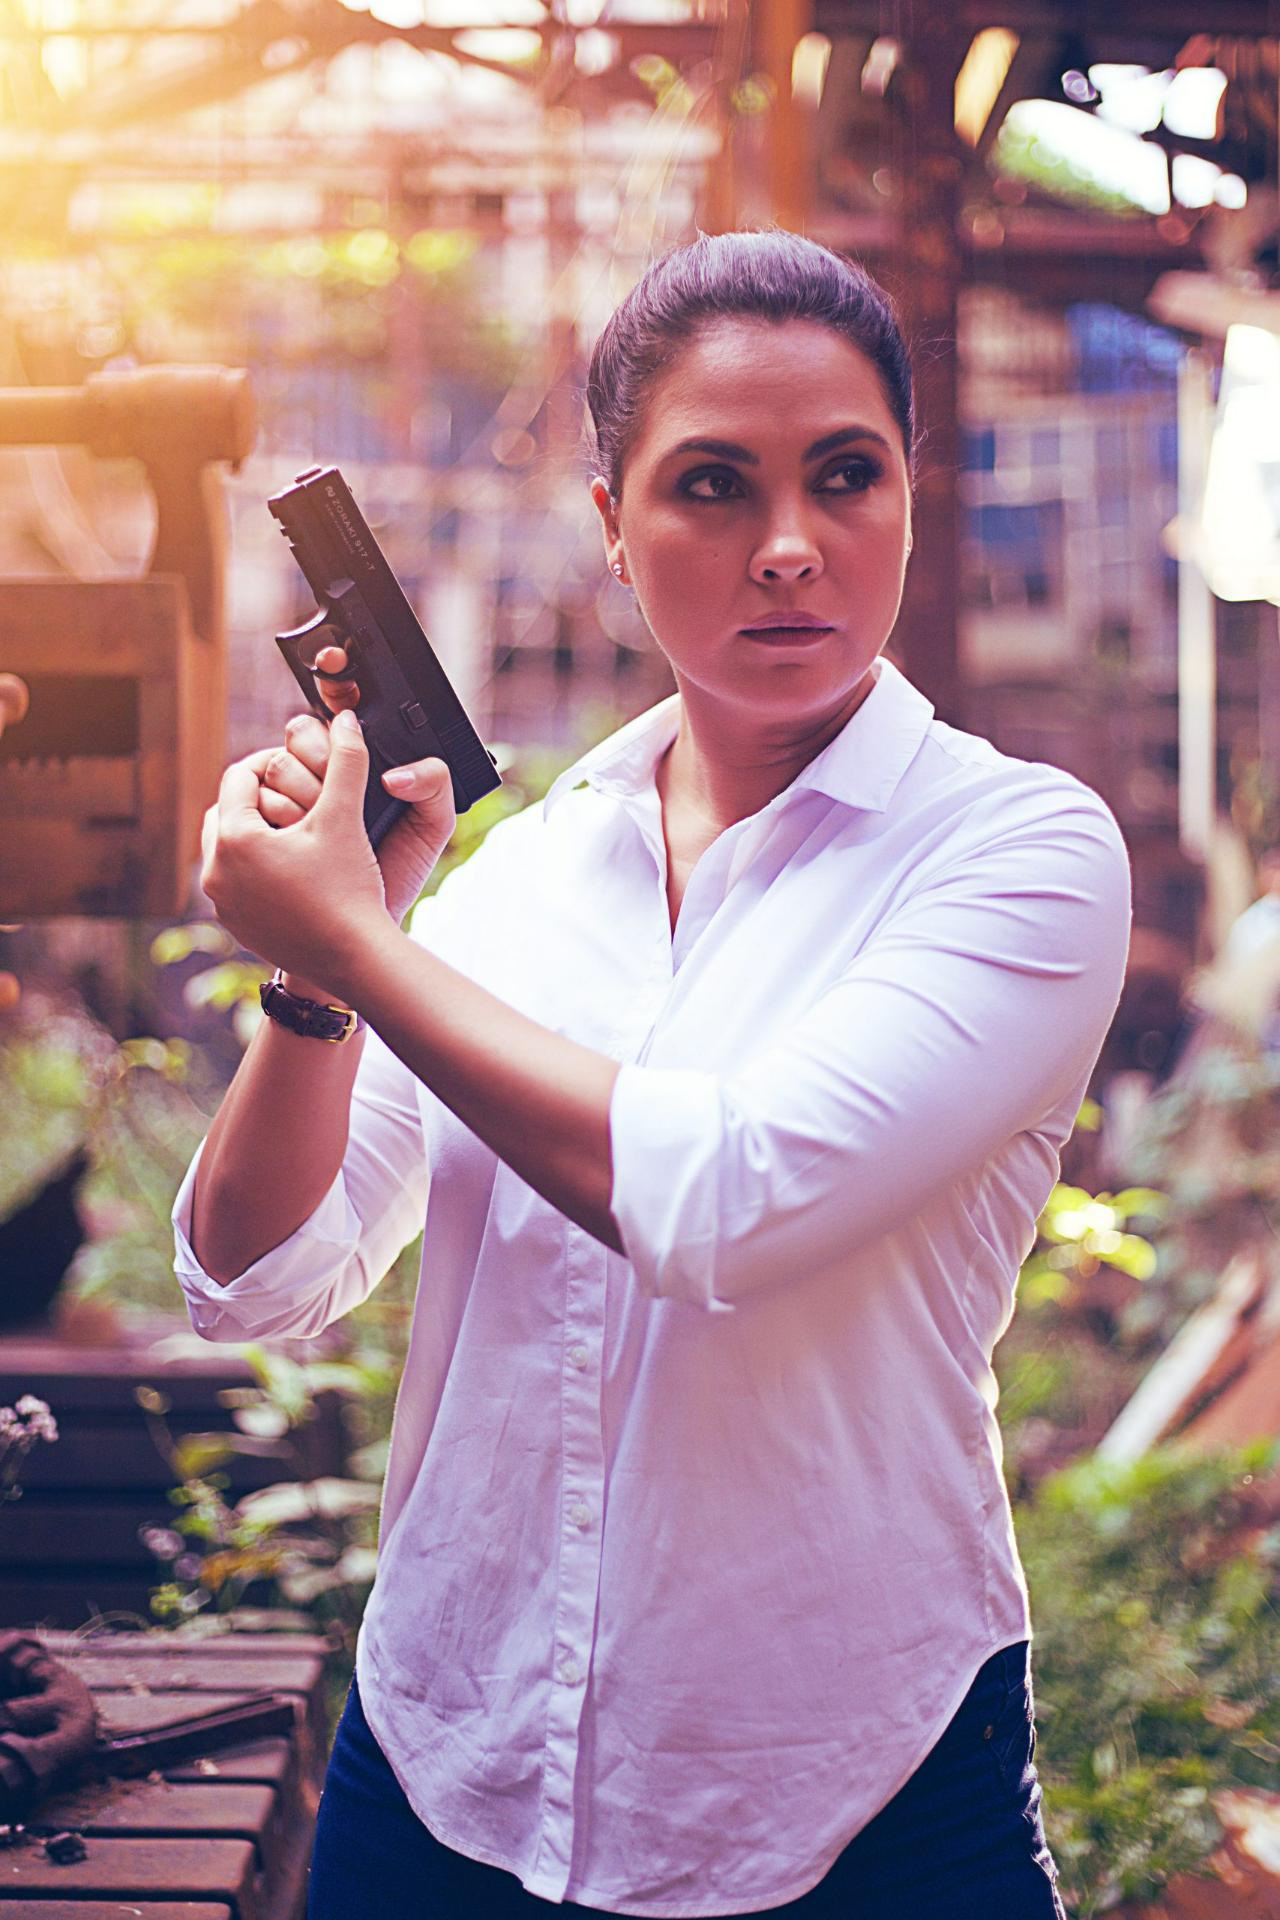 Lara Dutta in Hundred
Lara Dutta took a break for some time after becoming a mother. She made her comeback with the comedy series, Hundred and played the role of a female cop who is racing against time